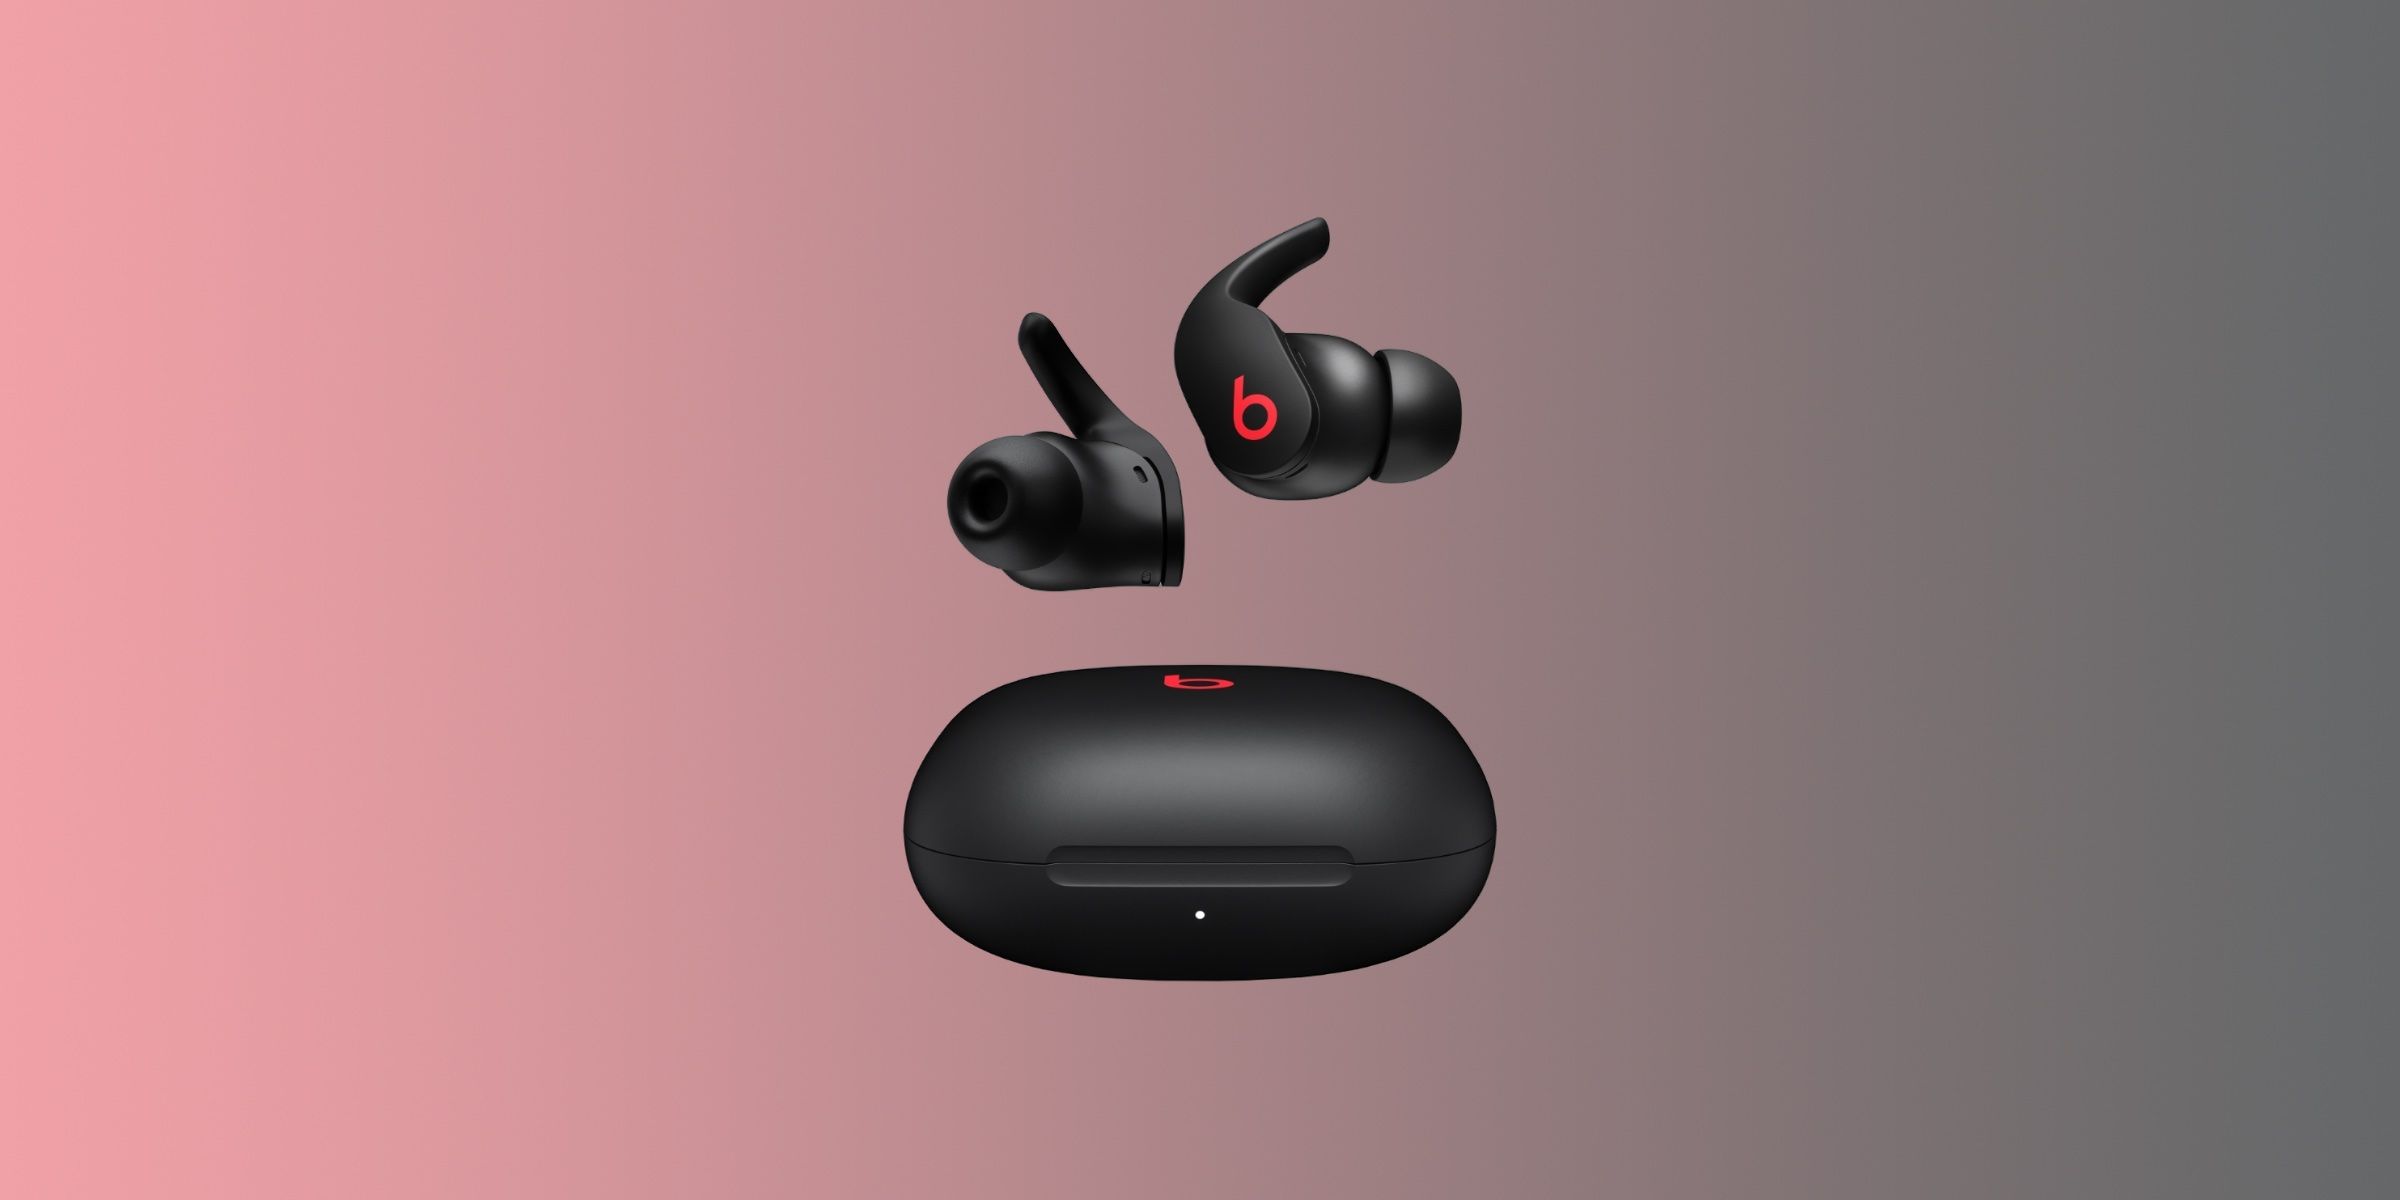 A pair of Beats Fit Pro in the Beats Black colorway.